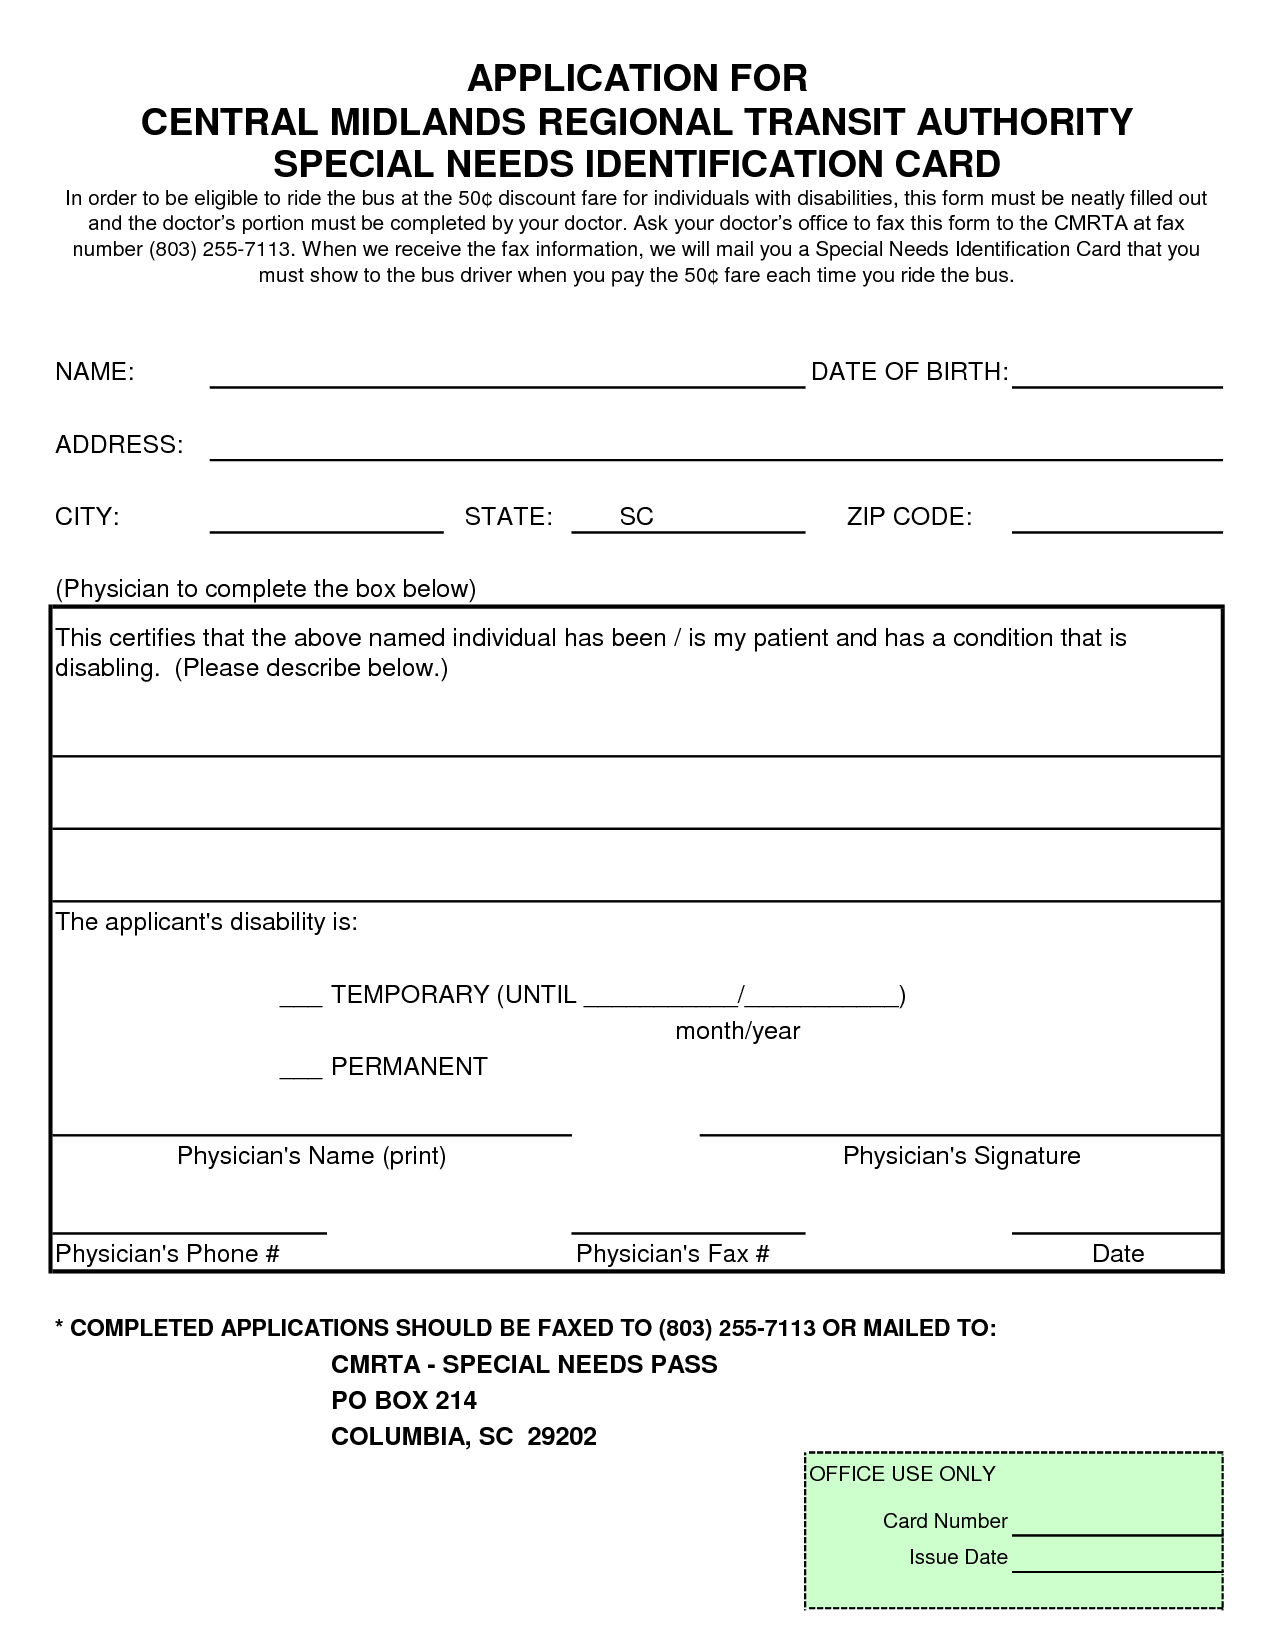 7-best-images-of-free-printable-doctor-office-forms-free-printable-office-forms-free-doctor